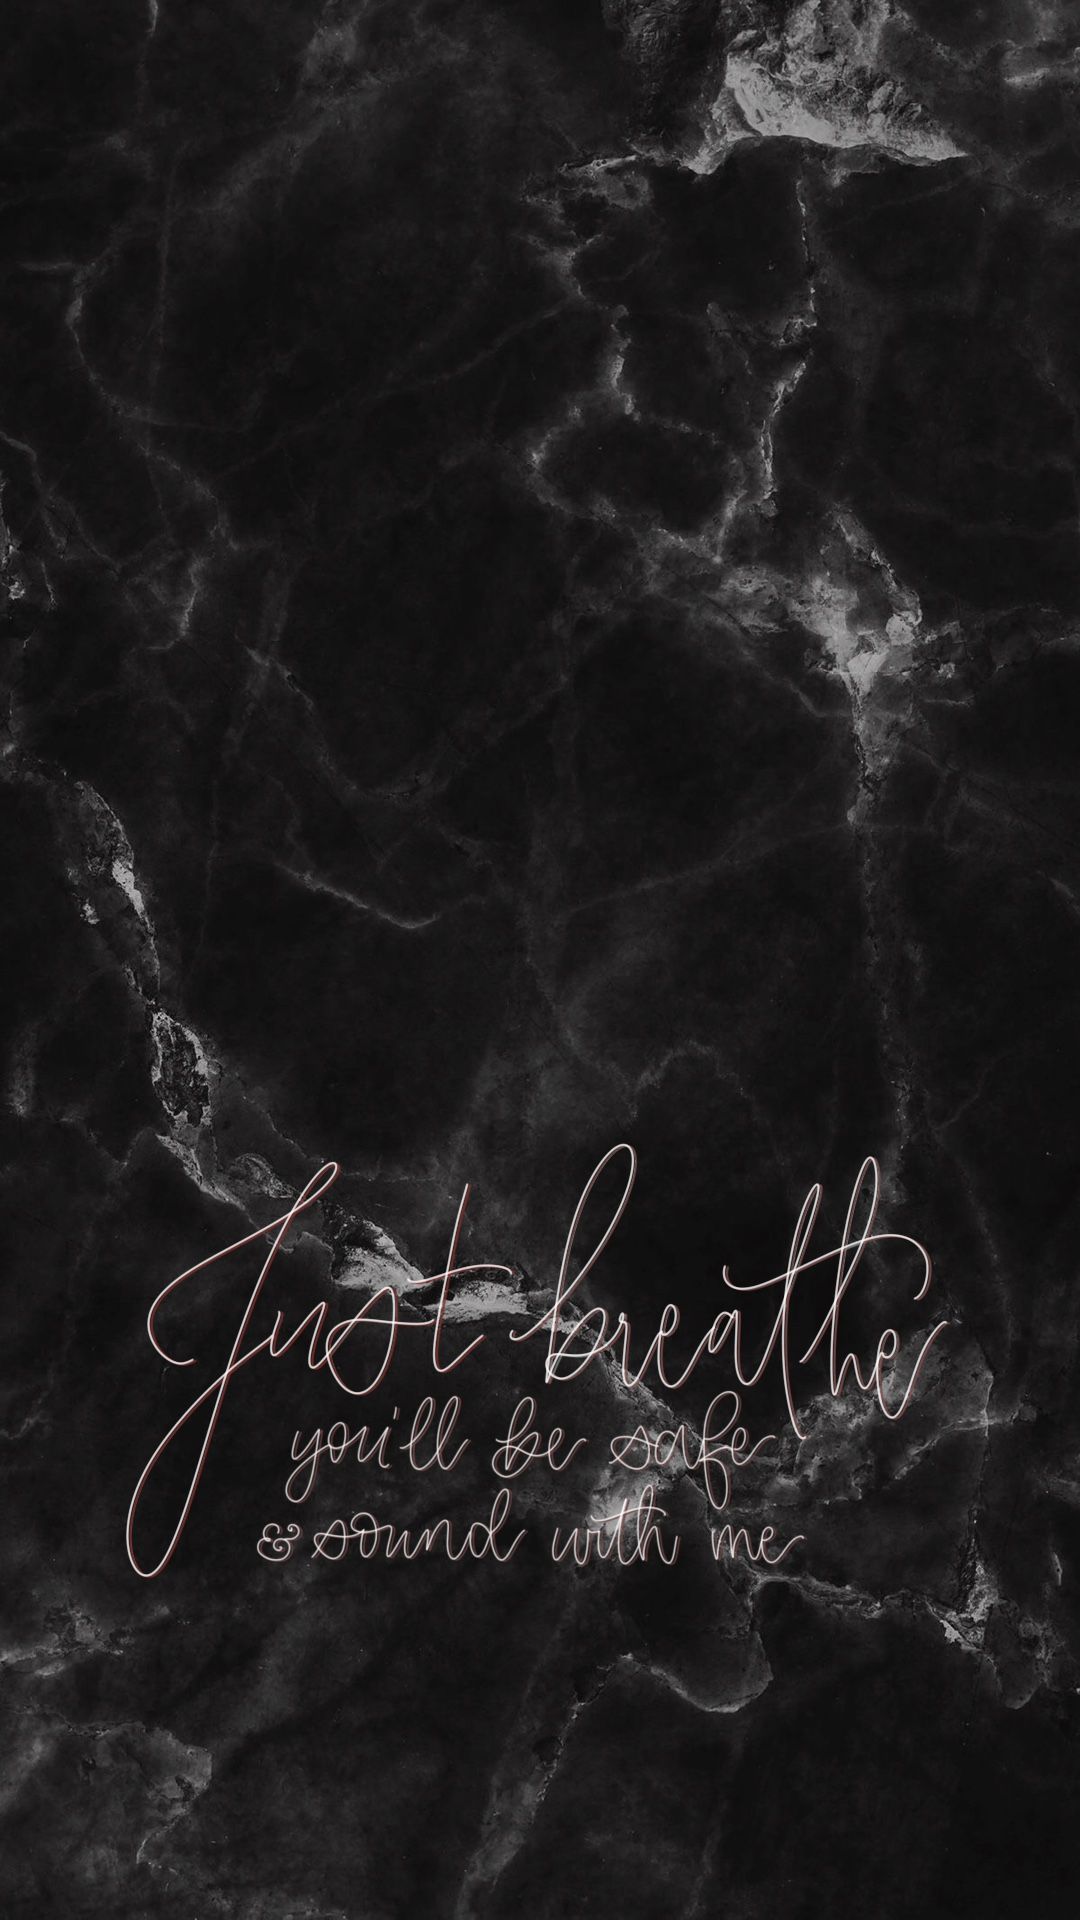 Just breathe you'll be safe and sound with me Stef gretzinger lullaby. Sound, iPhone wallpaper, Lullabies